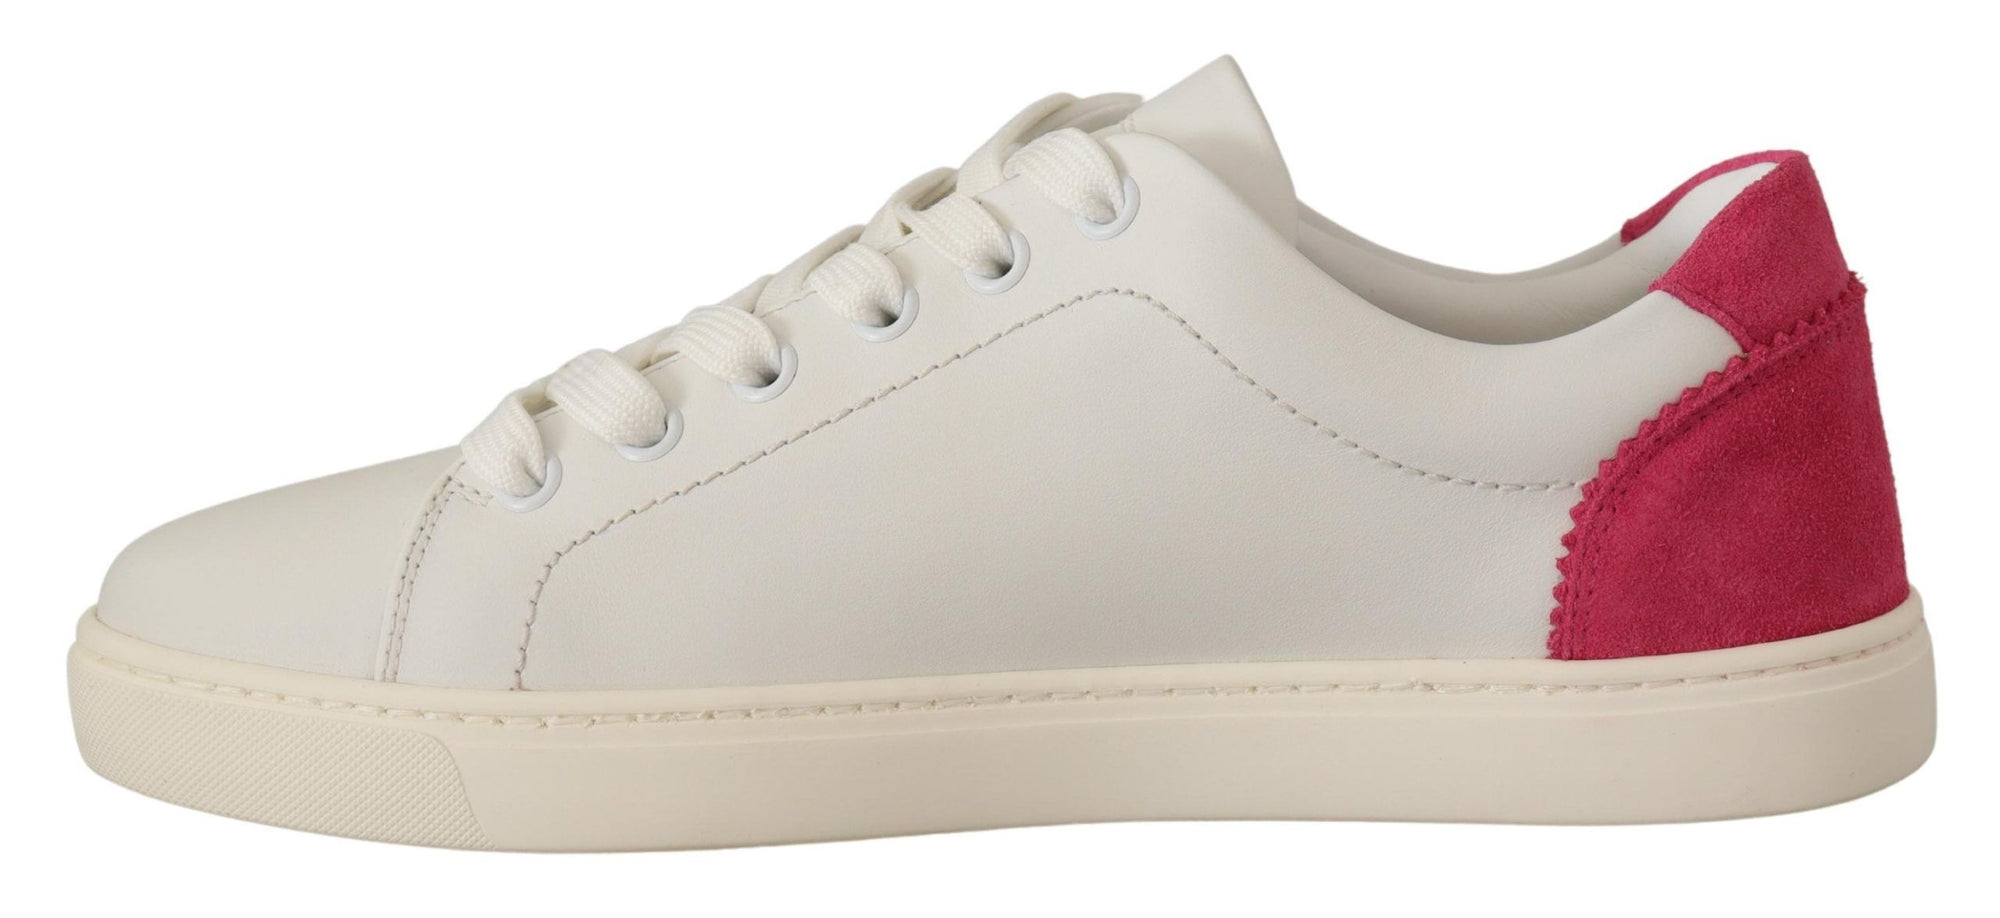 Elegant White Leather Low-Top Sneakers